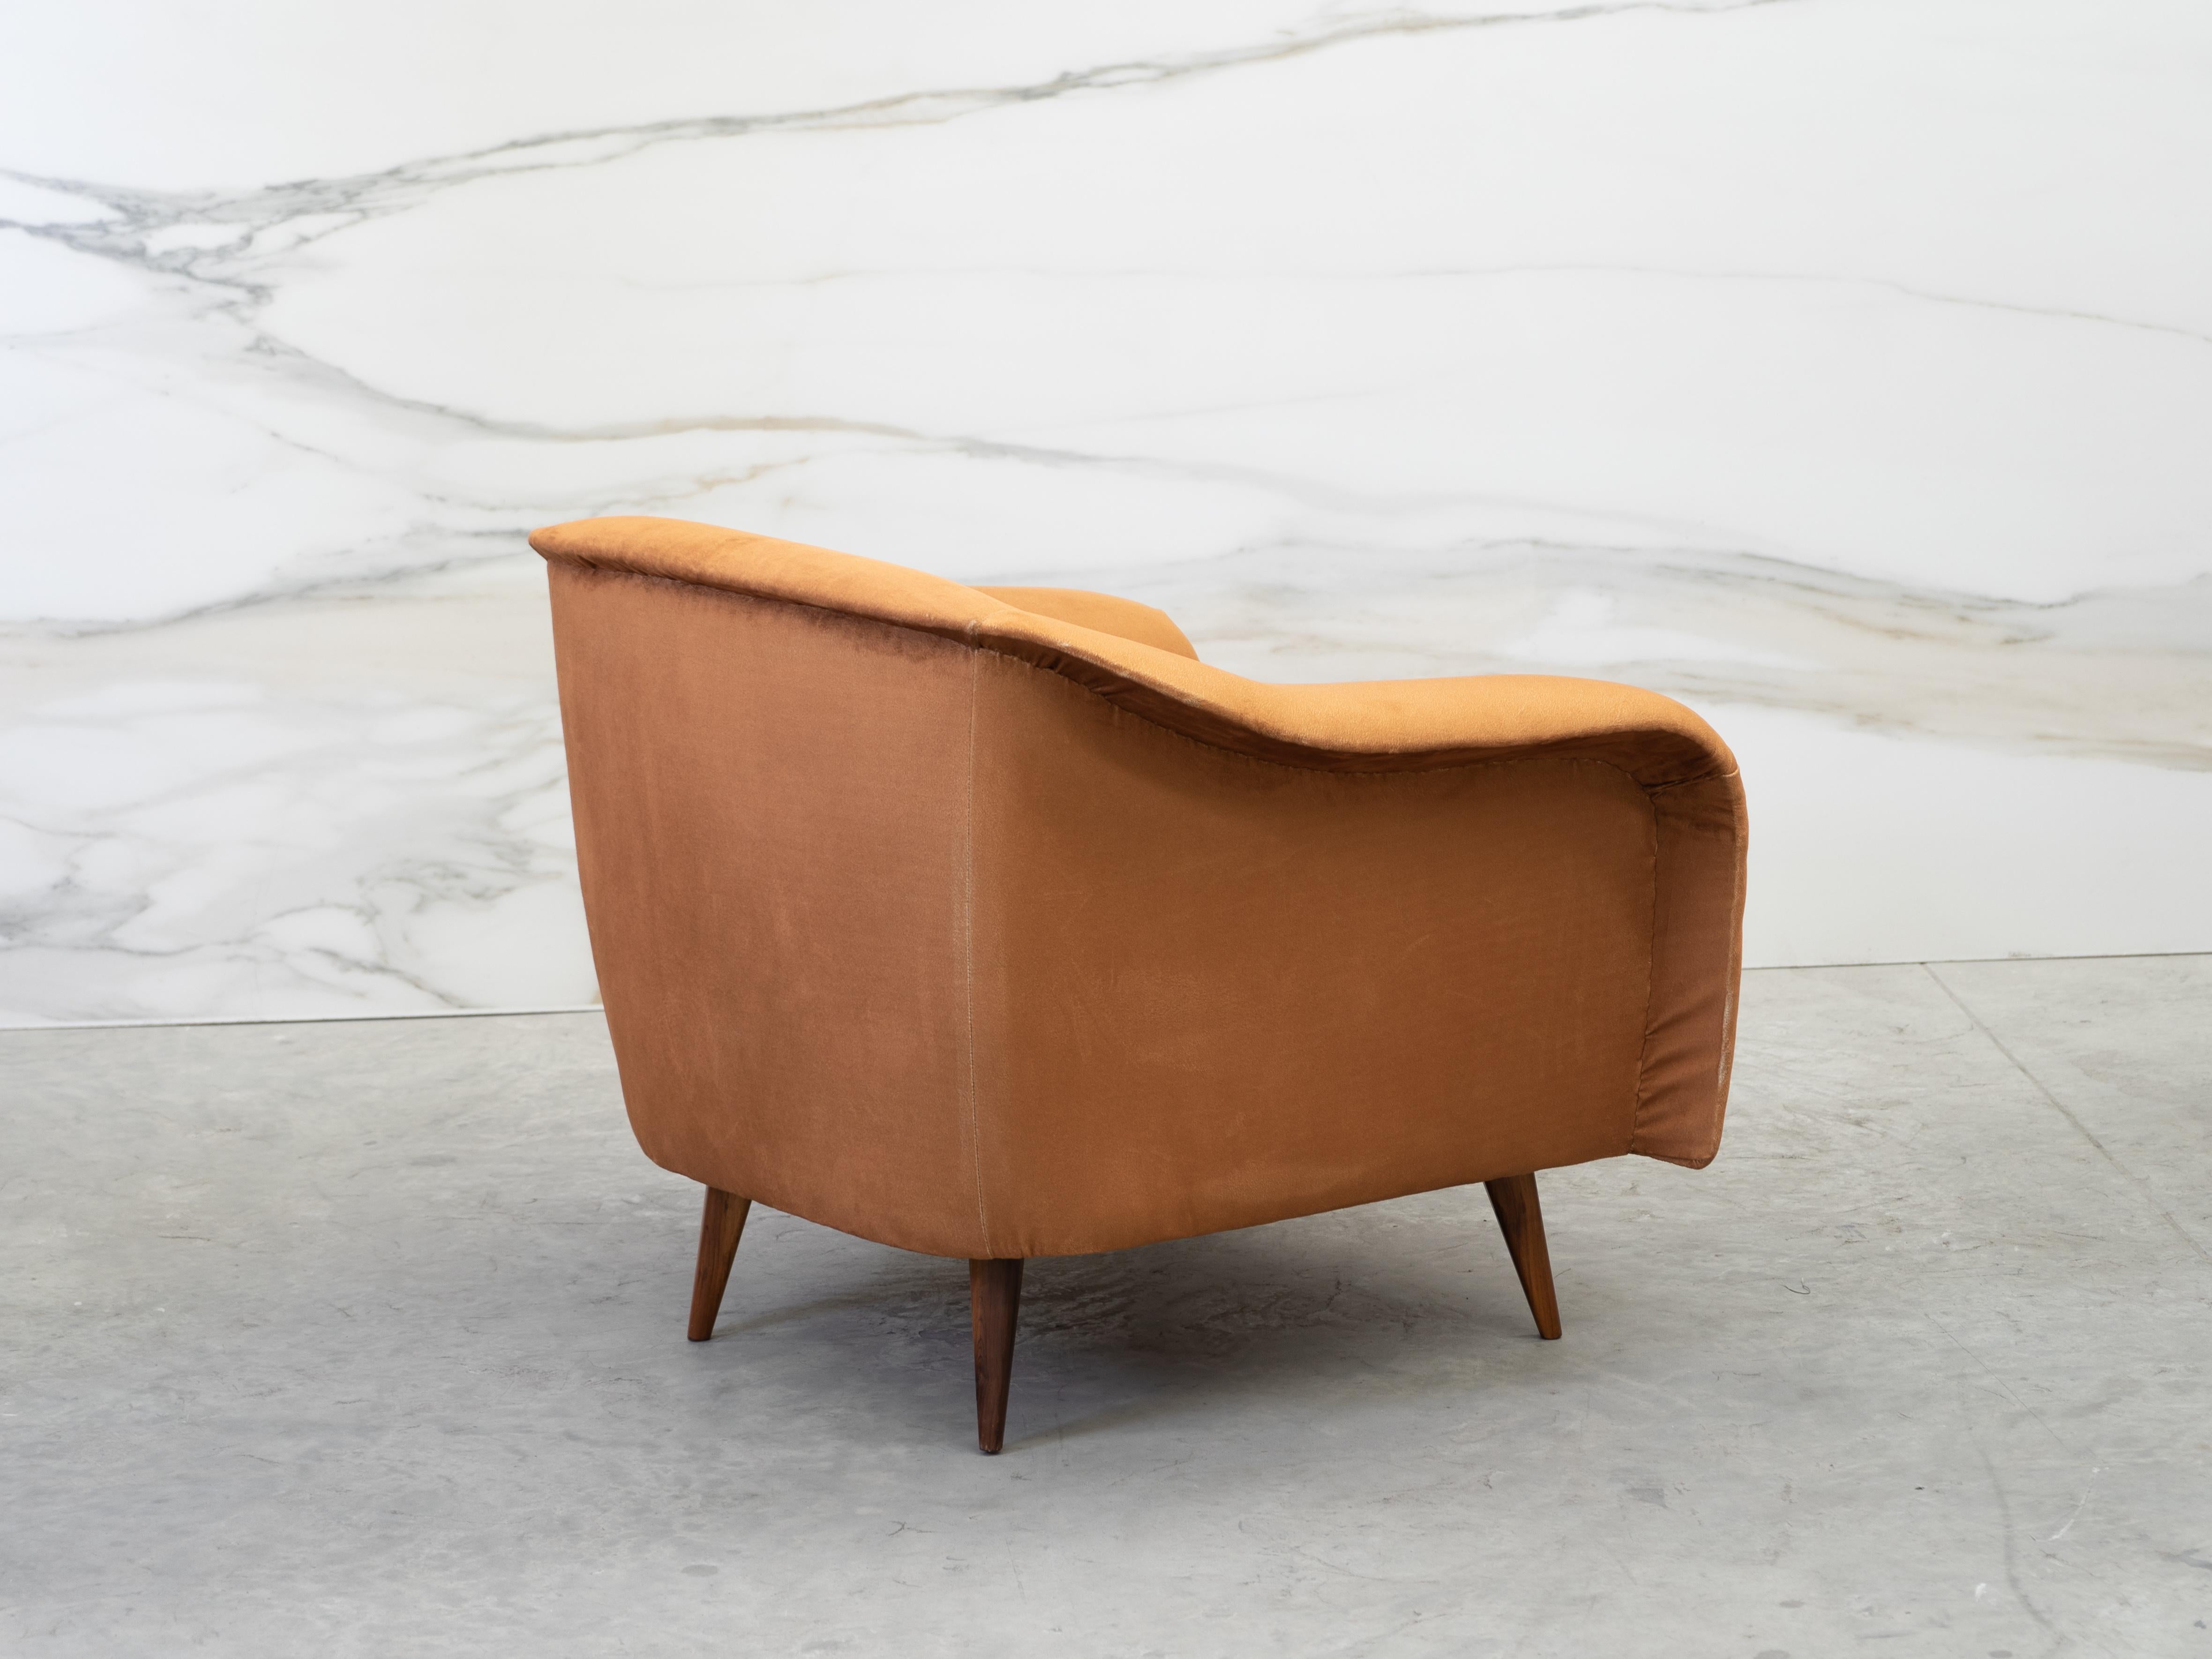 Armchair curved armchairs designed by Joaquim Tenreiro 

Shell-shaped seat wooden frame with fabric- upholstered padding and produced circa the 1960s, raised on tapered legs in Brazilian Rosewood. Very good vintage condition.
Recently upholstered